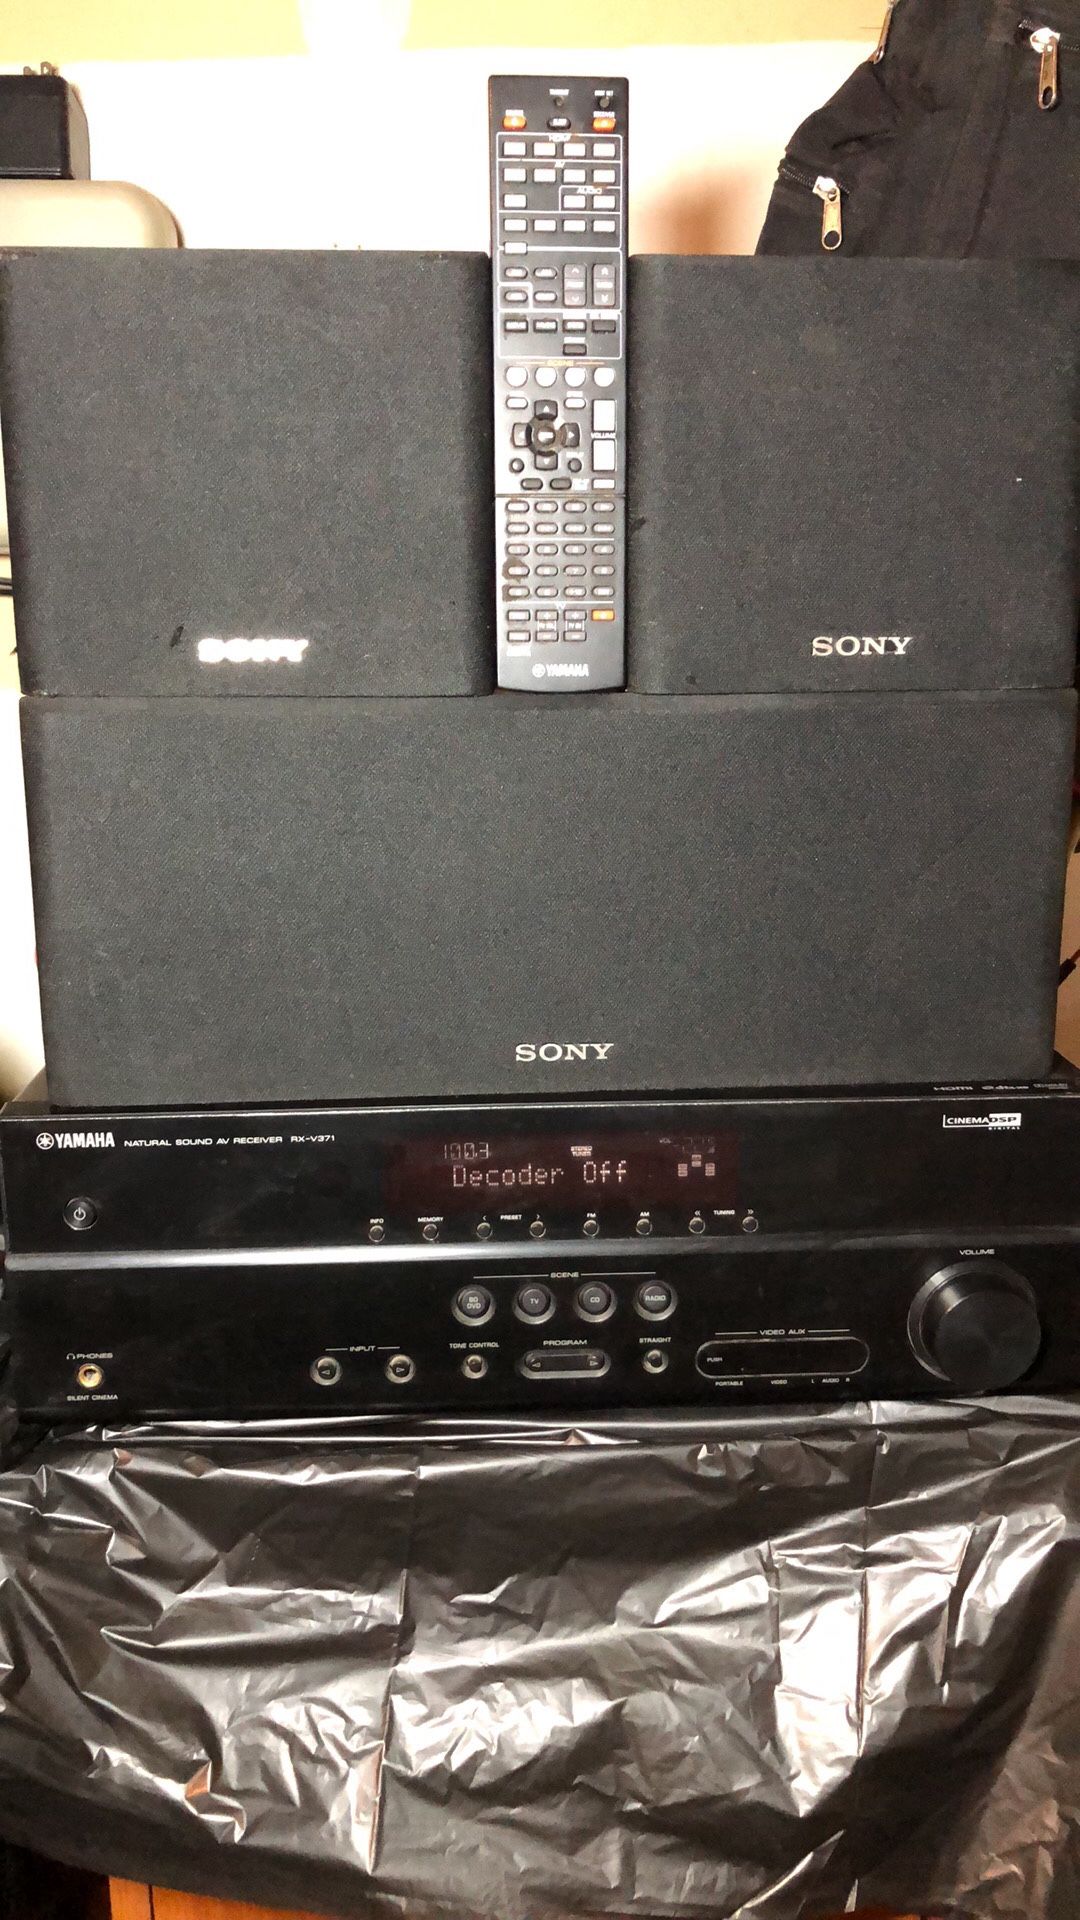 Yamaha Natural Sound Av Receiver Tx-V371 With Tree Sony Speaks And Remote Control